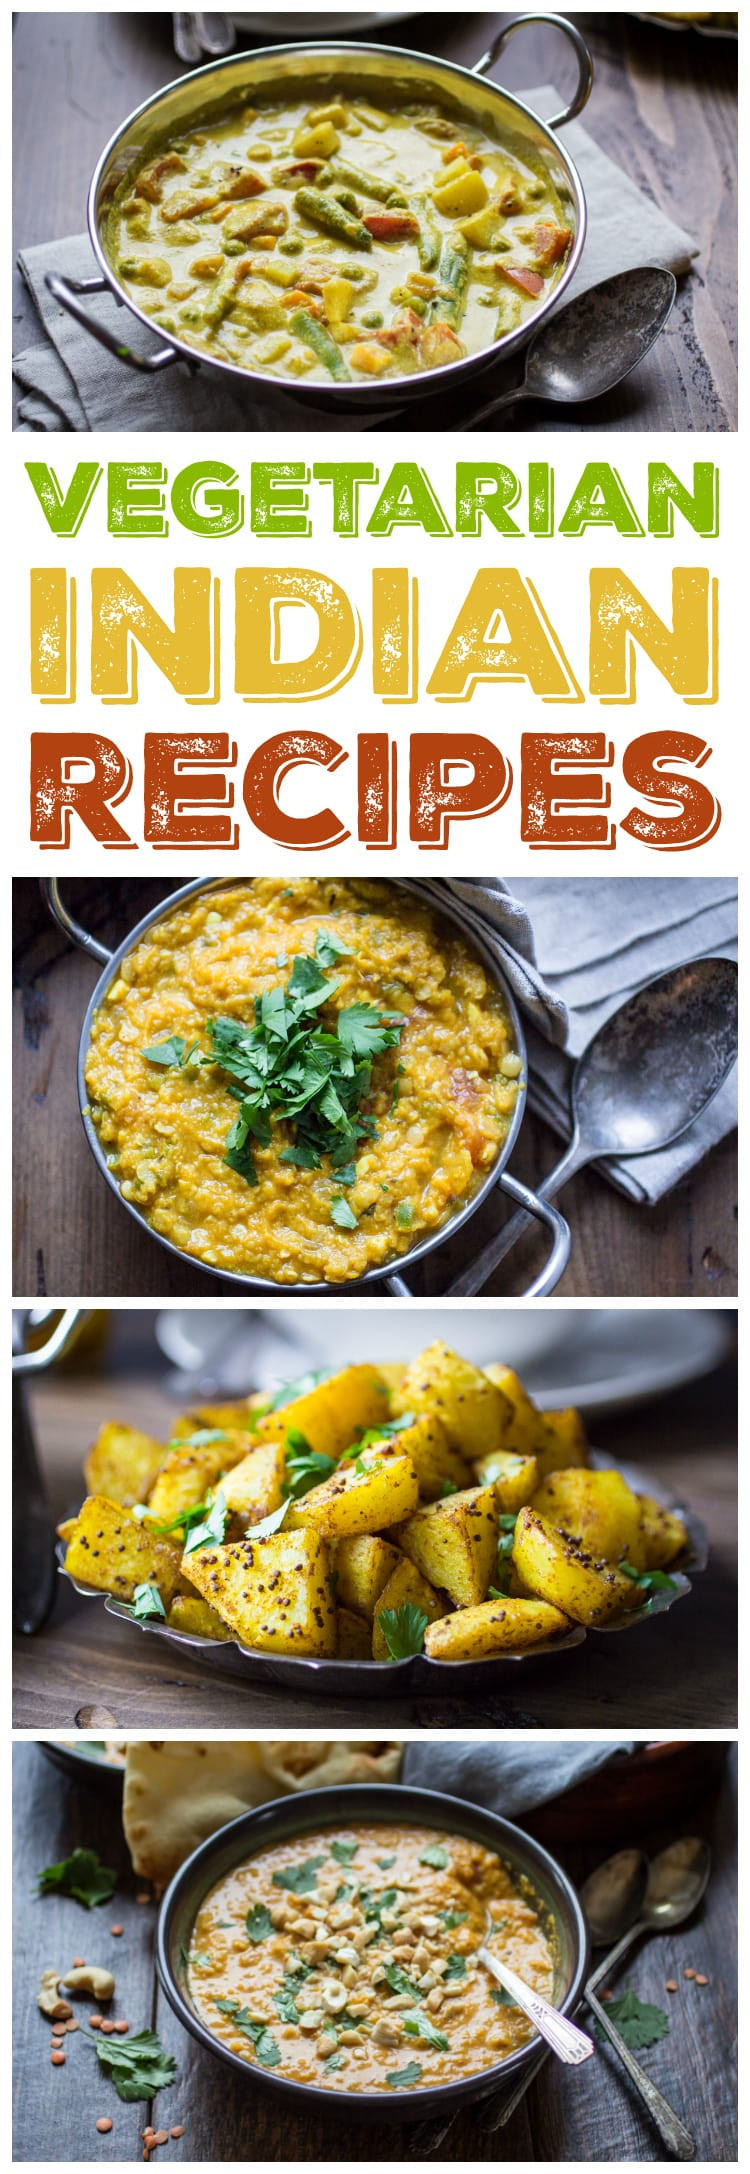 Easy Vegetarian Indian Recipes
 10 Ve arian Indian Recipes to Make Again and Again The